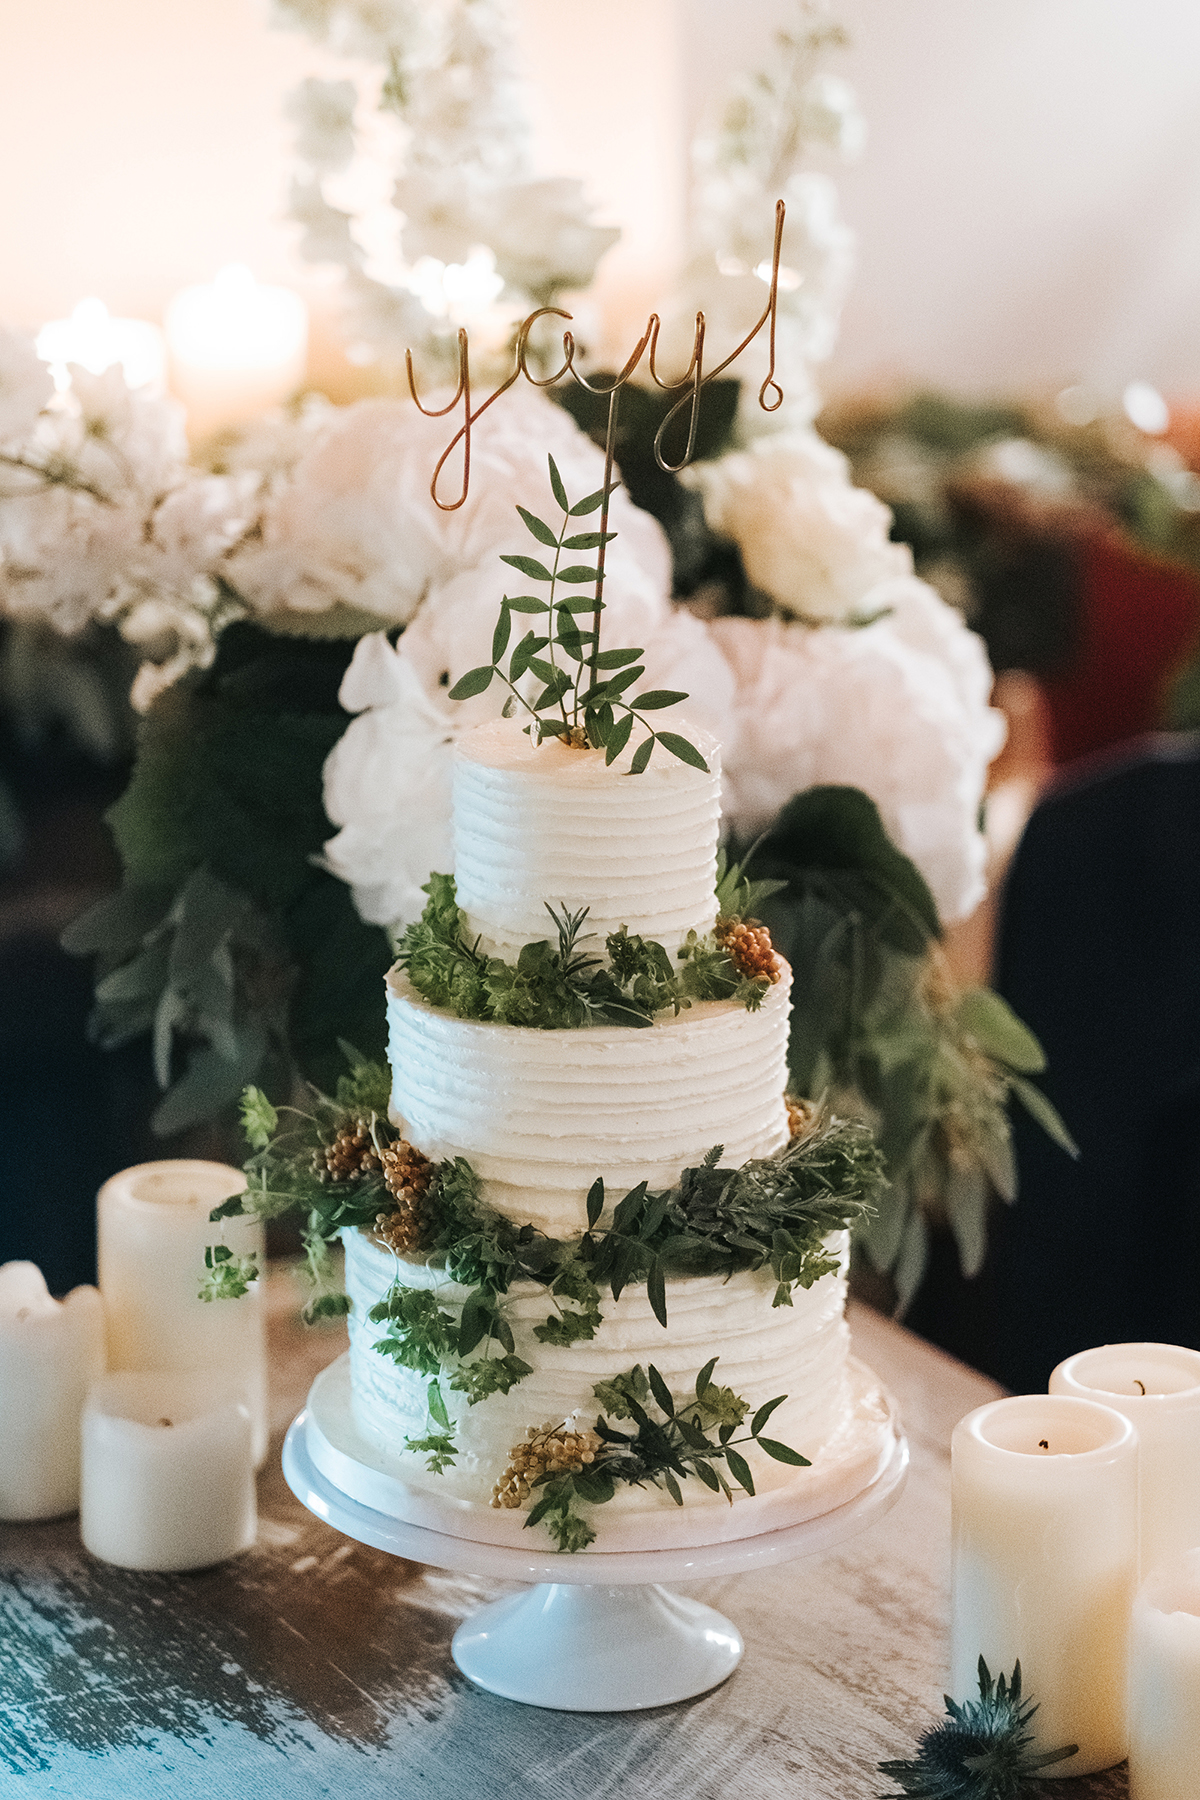 A 3 tier weding cake decorated with green leaves and a YAY cake topper